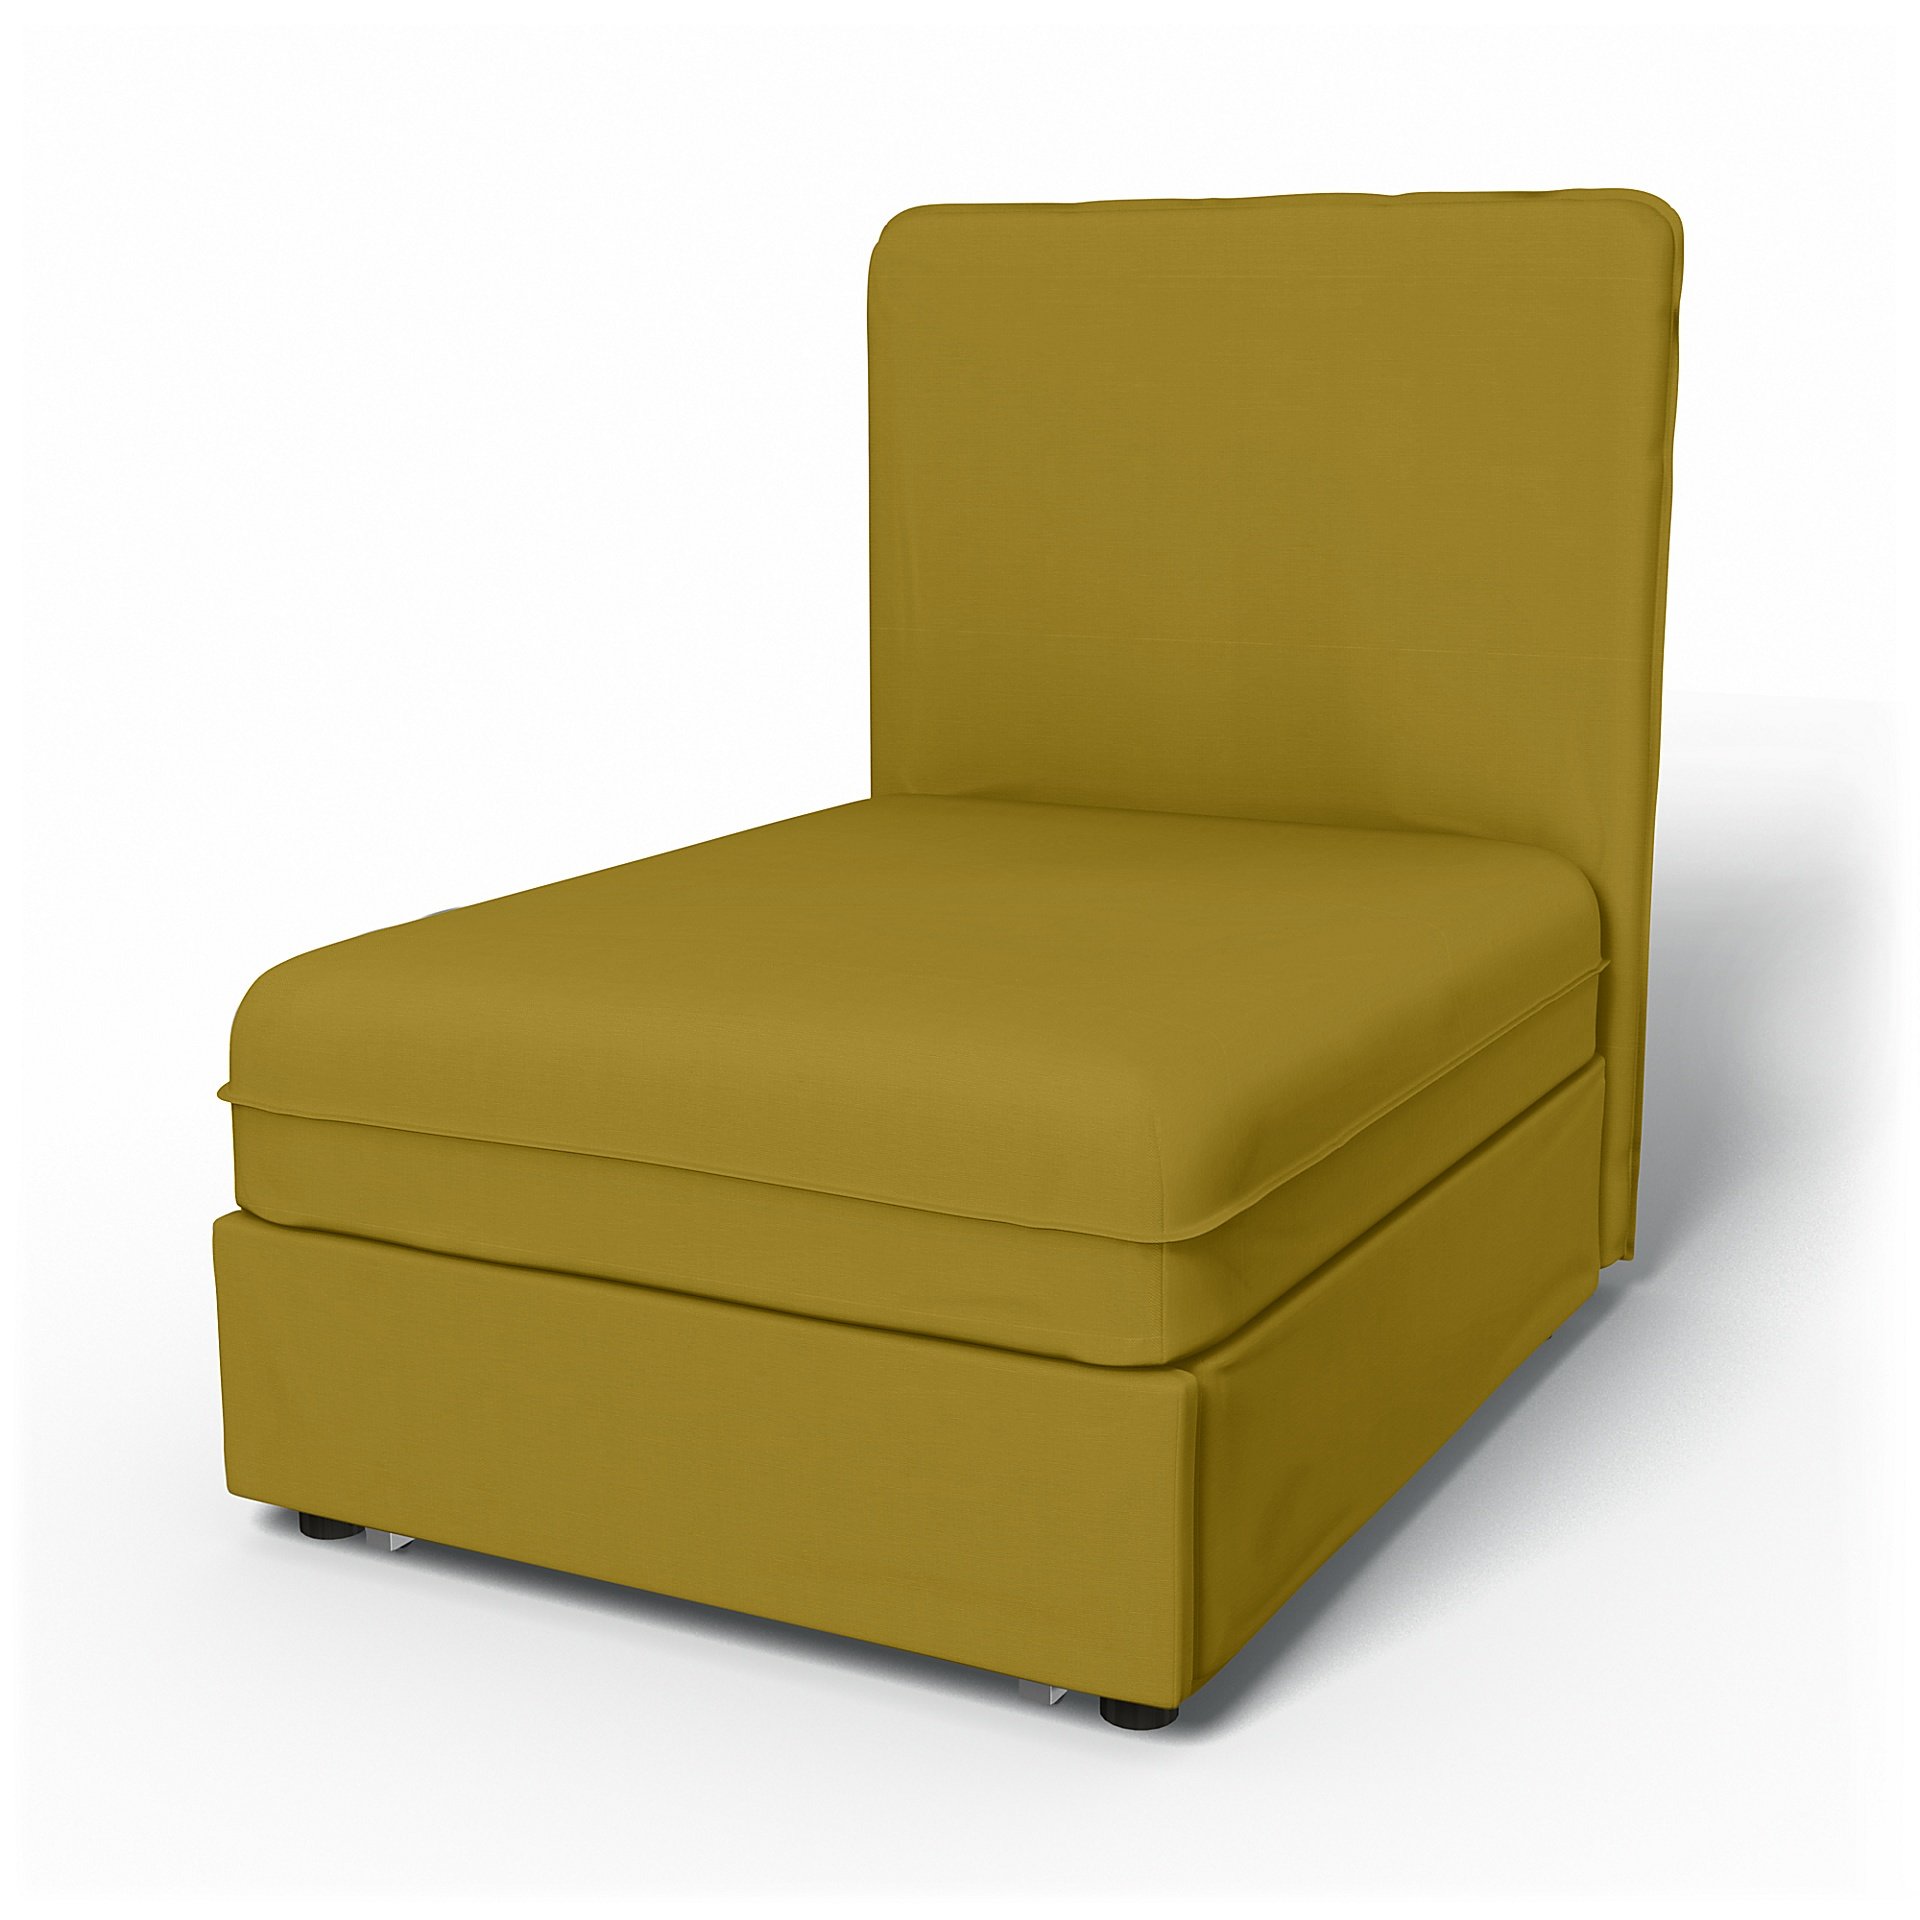 IKEA - Vallentuna Seat Module with High Back Sofa Bed Cover (80x100x46cm), Olive Oil, Cotton - Bemz